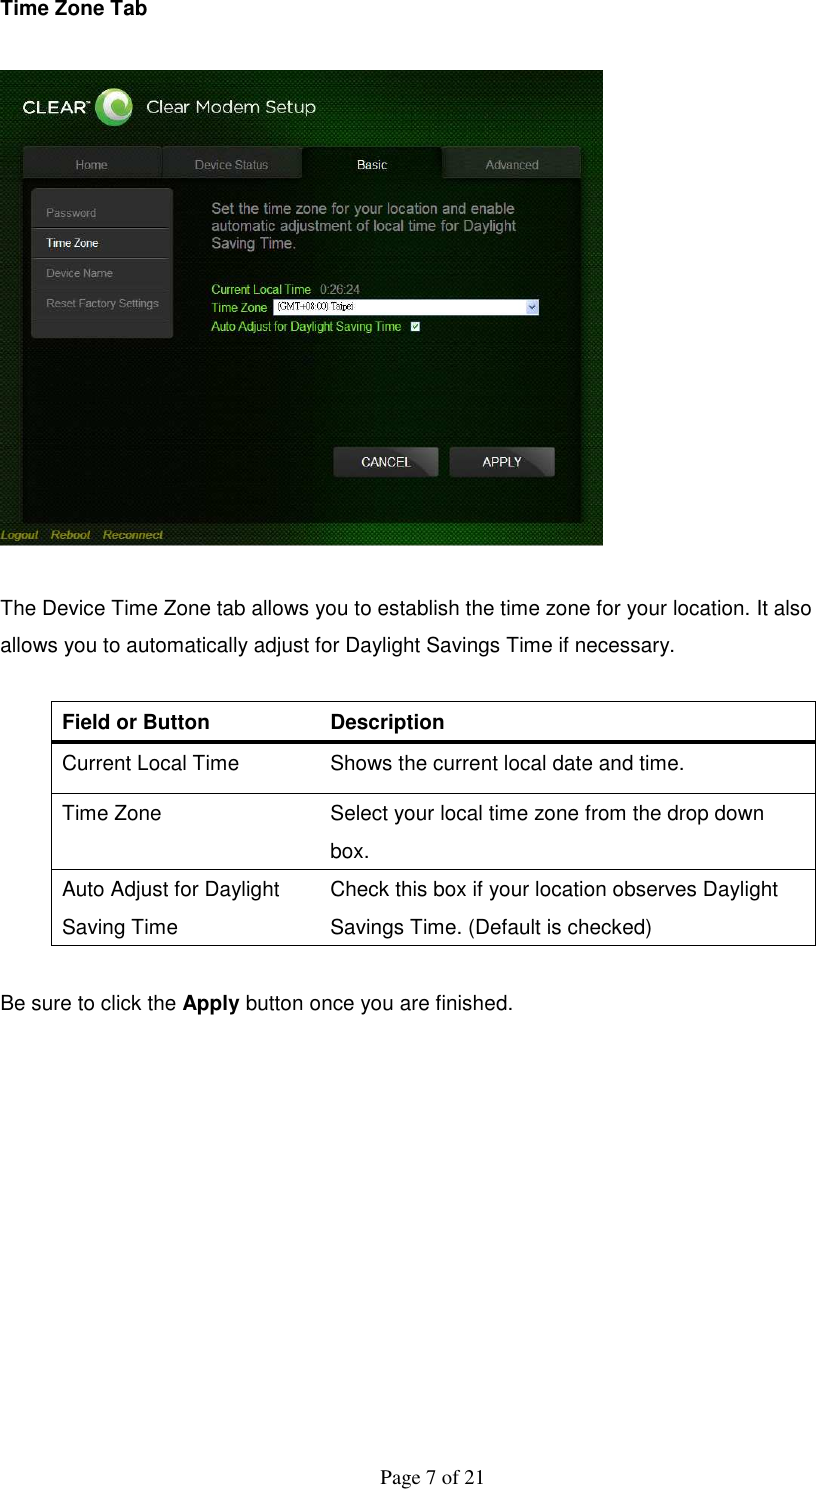  Page 7 of 21 Time Zone Tab    The Device Time Zone tab allows you to establish the time zone for your location. It also allows you to automatically adjust for Daylight Savings Time if necessary.  Field or Button   Description   Current Local Time    Shows the current local date and time.   Time Zone    Select your local time zone from the drop down box.   Auto Adjust for Daylight Saving Time   Check this box if your location observes Daylight Savings Time. (Default is checked)    Be sure to click the Apply button once you are finished.            